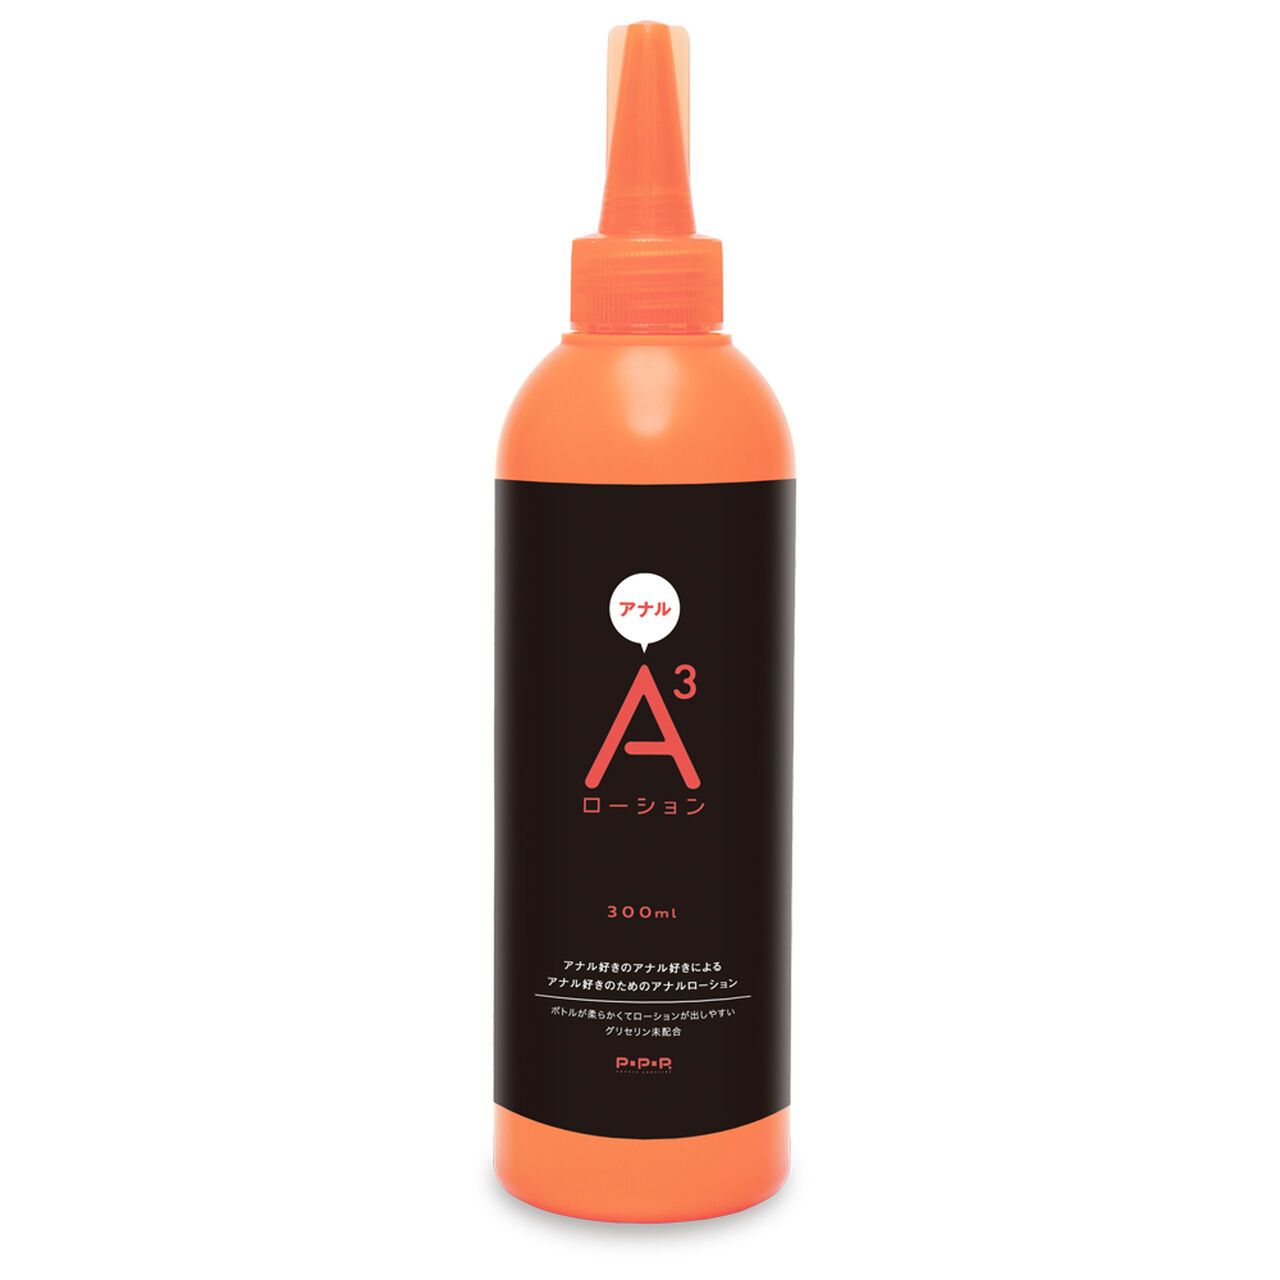 A3 ANAL LOTION 300ml,, large image number 0